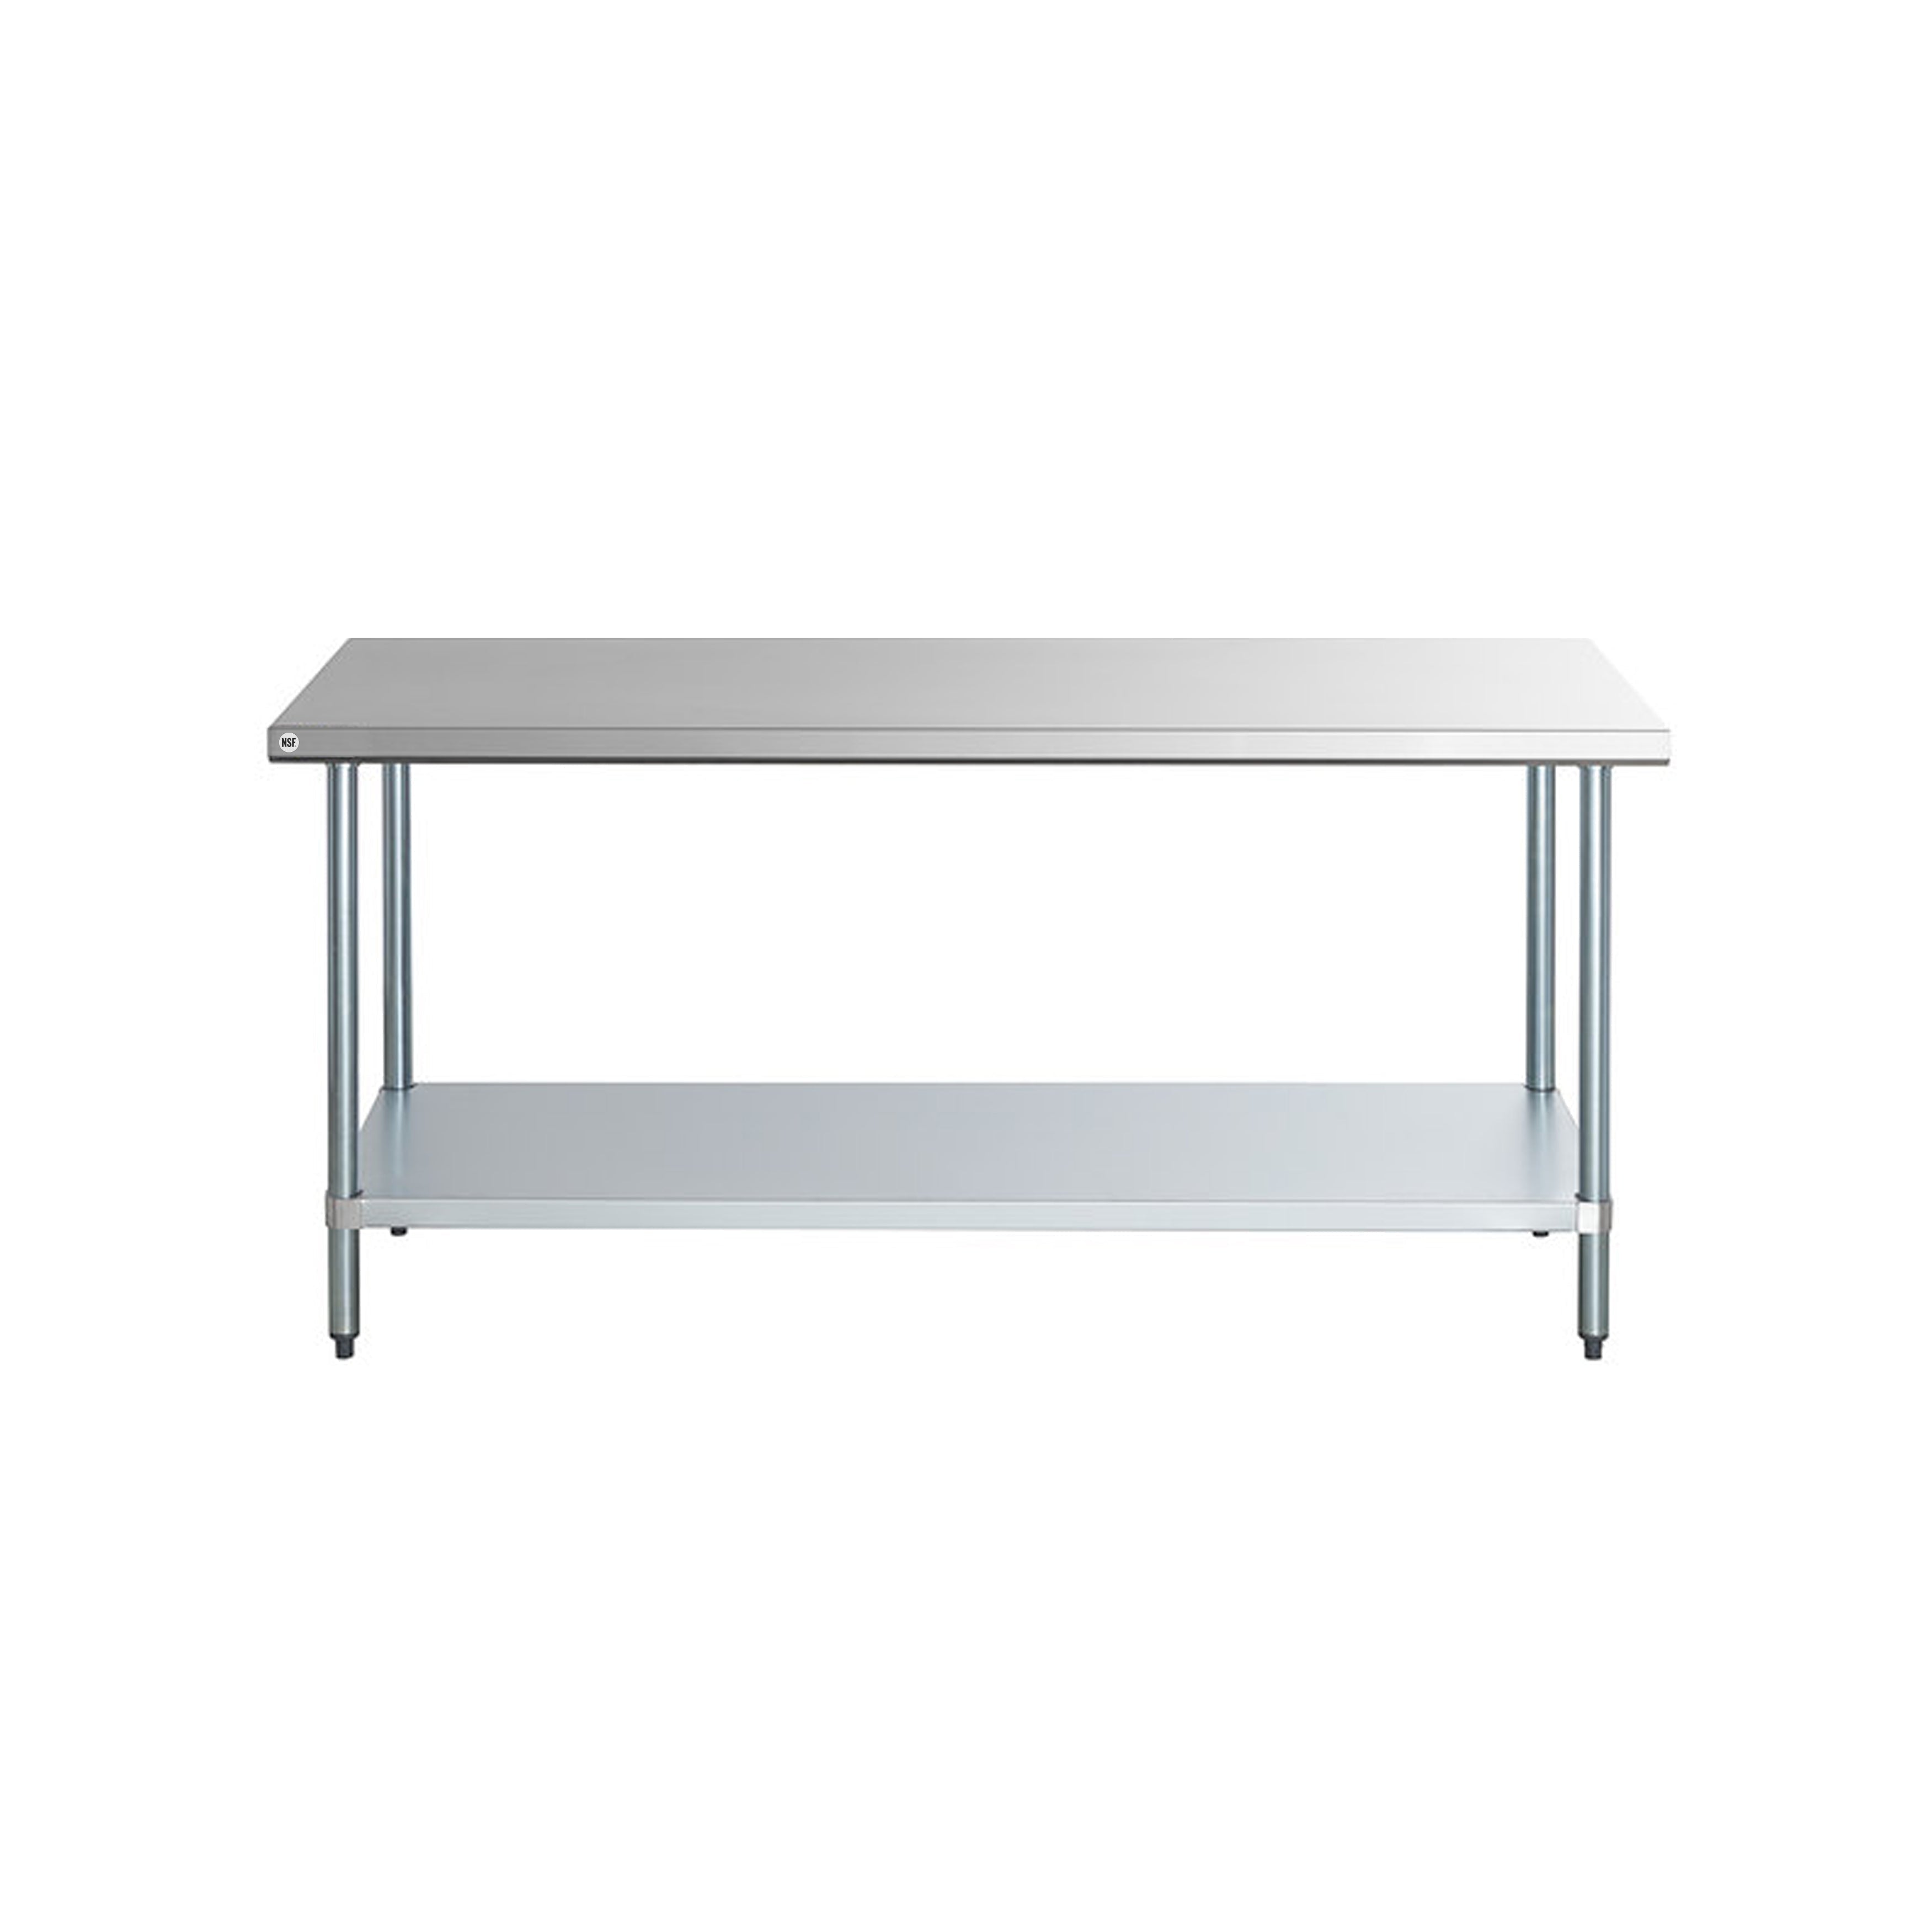 Omcan - 22068, Commercial 24" x 72" Stainless Steel Kitchen Work Table 1200lbs Light Duty